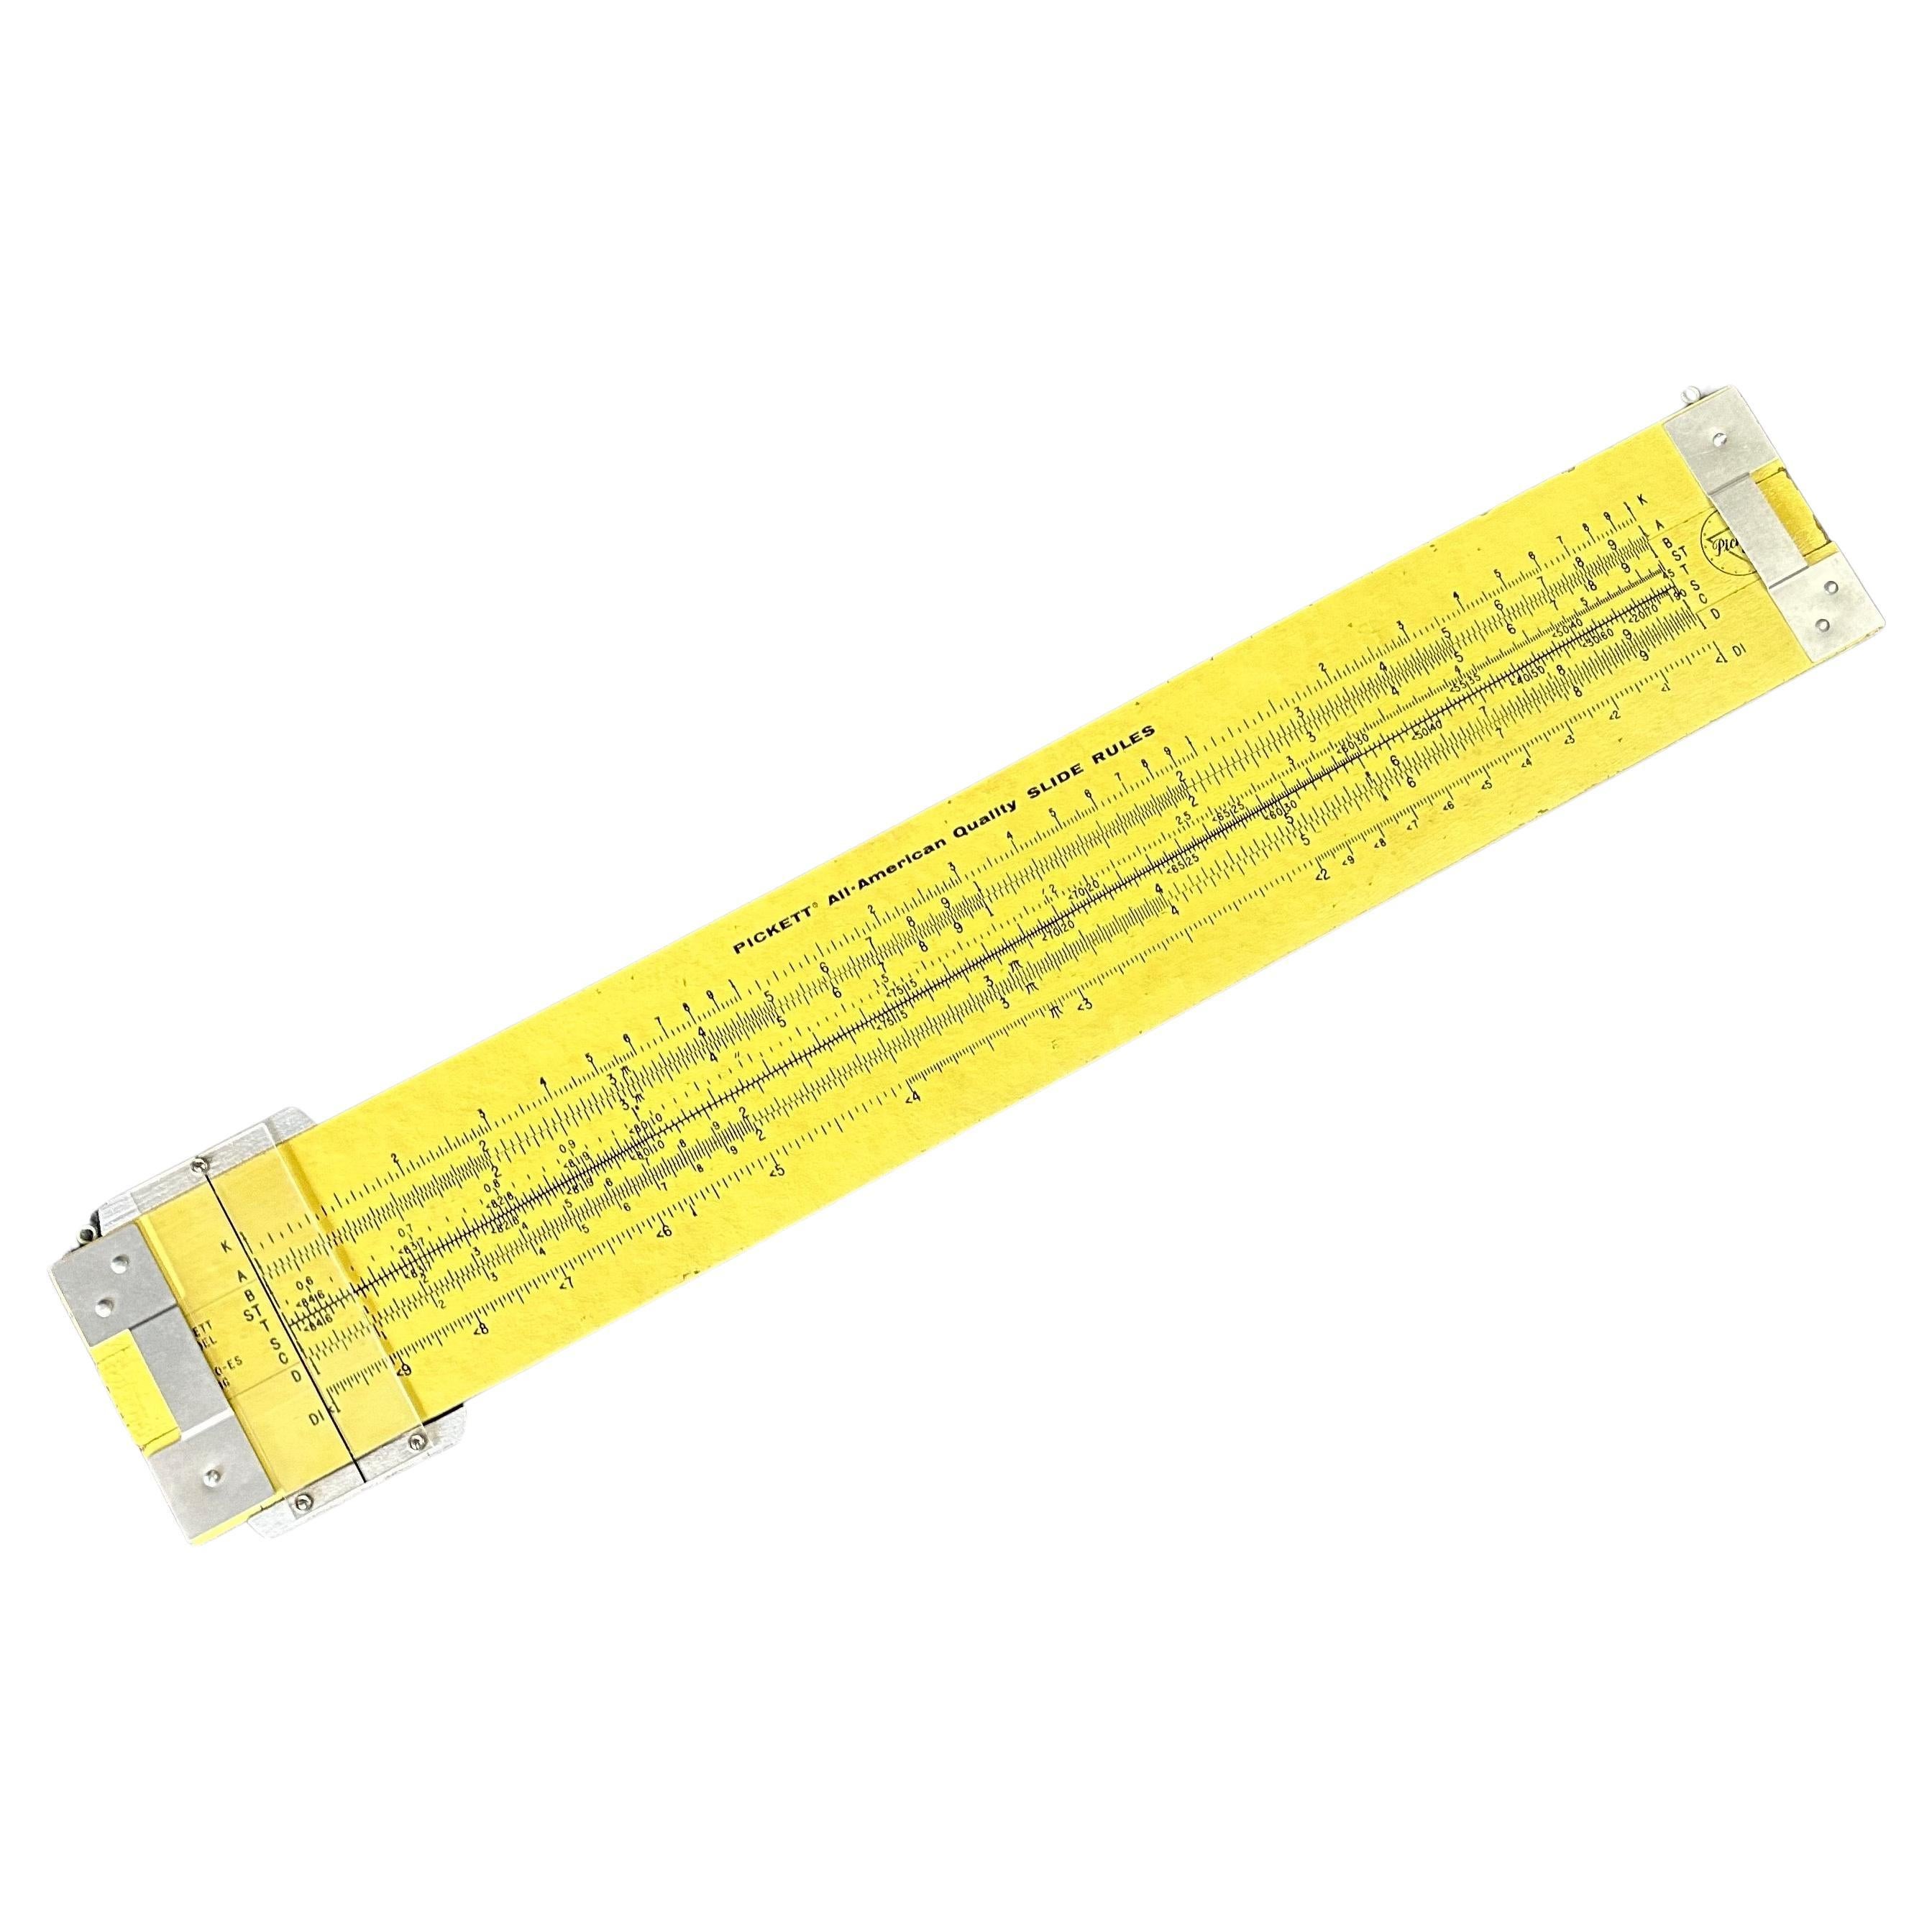 Unique Vintage Oversized 4' Industrial Slide Rule by Pickett For Sale